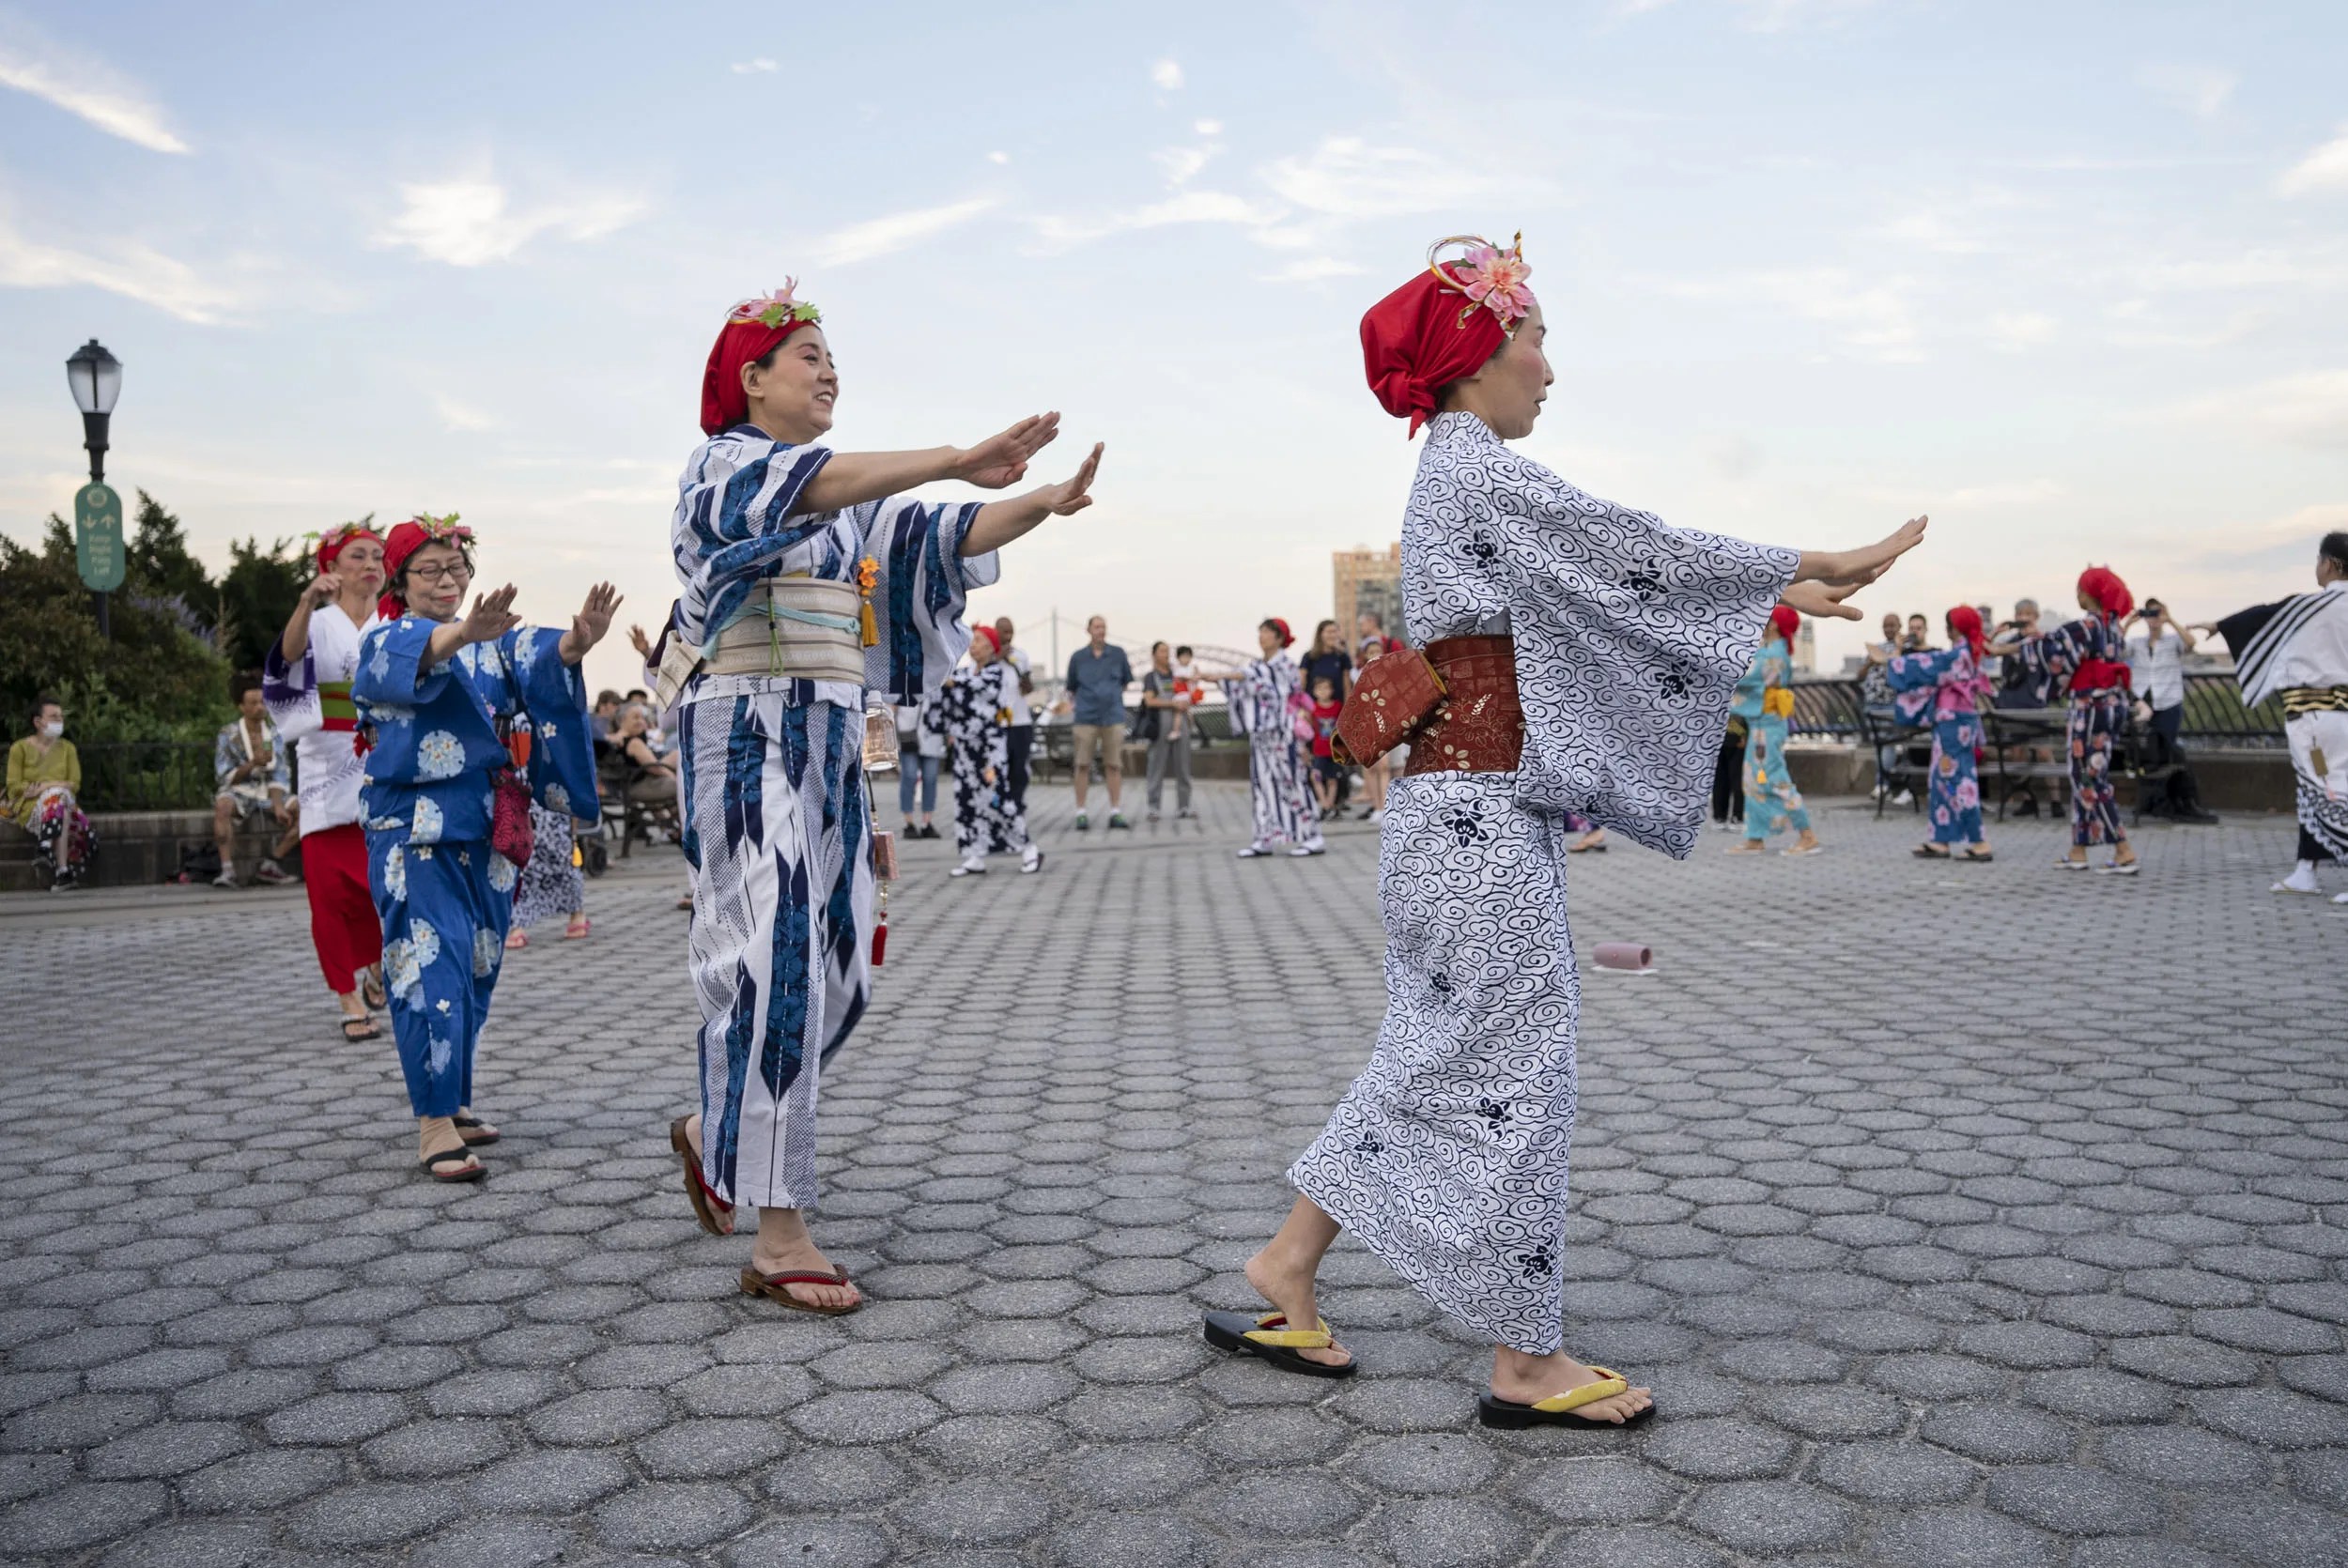 Many women dancing outside in traditional Japanese attire including kimonos and red headwear with flowers